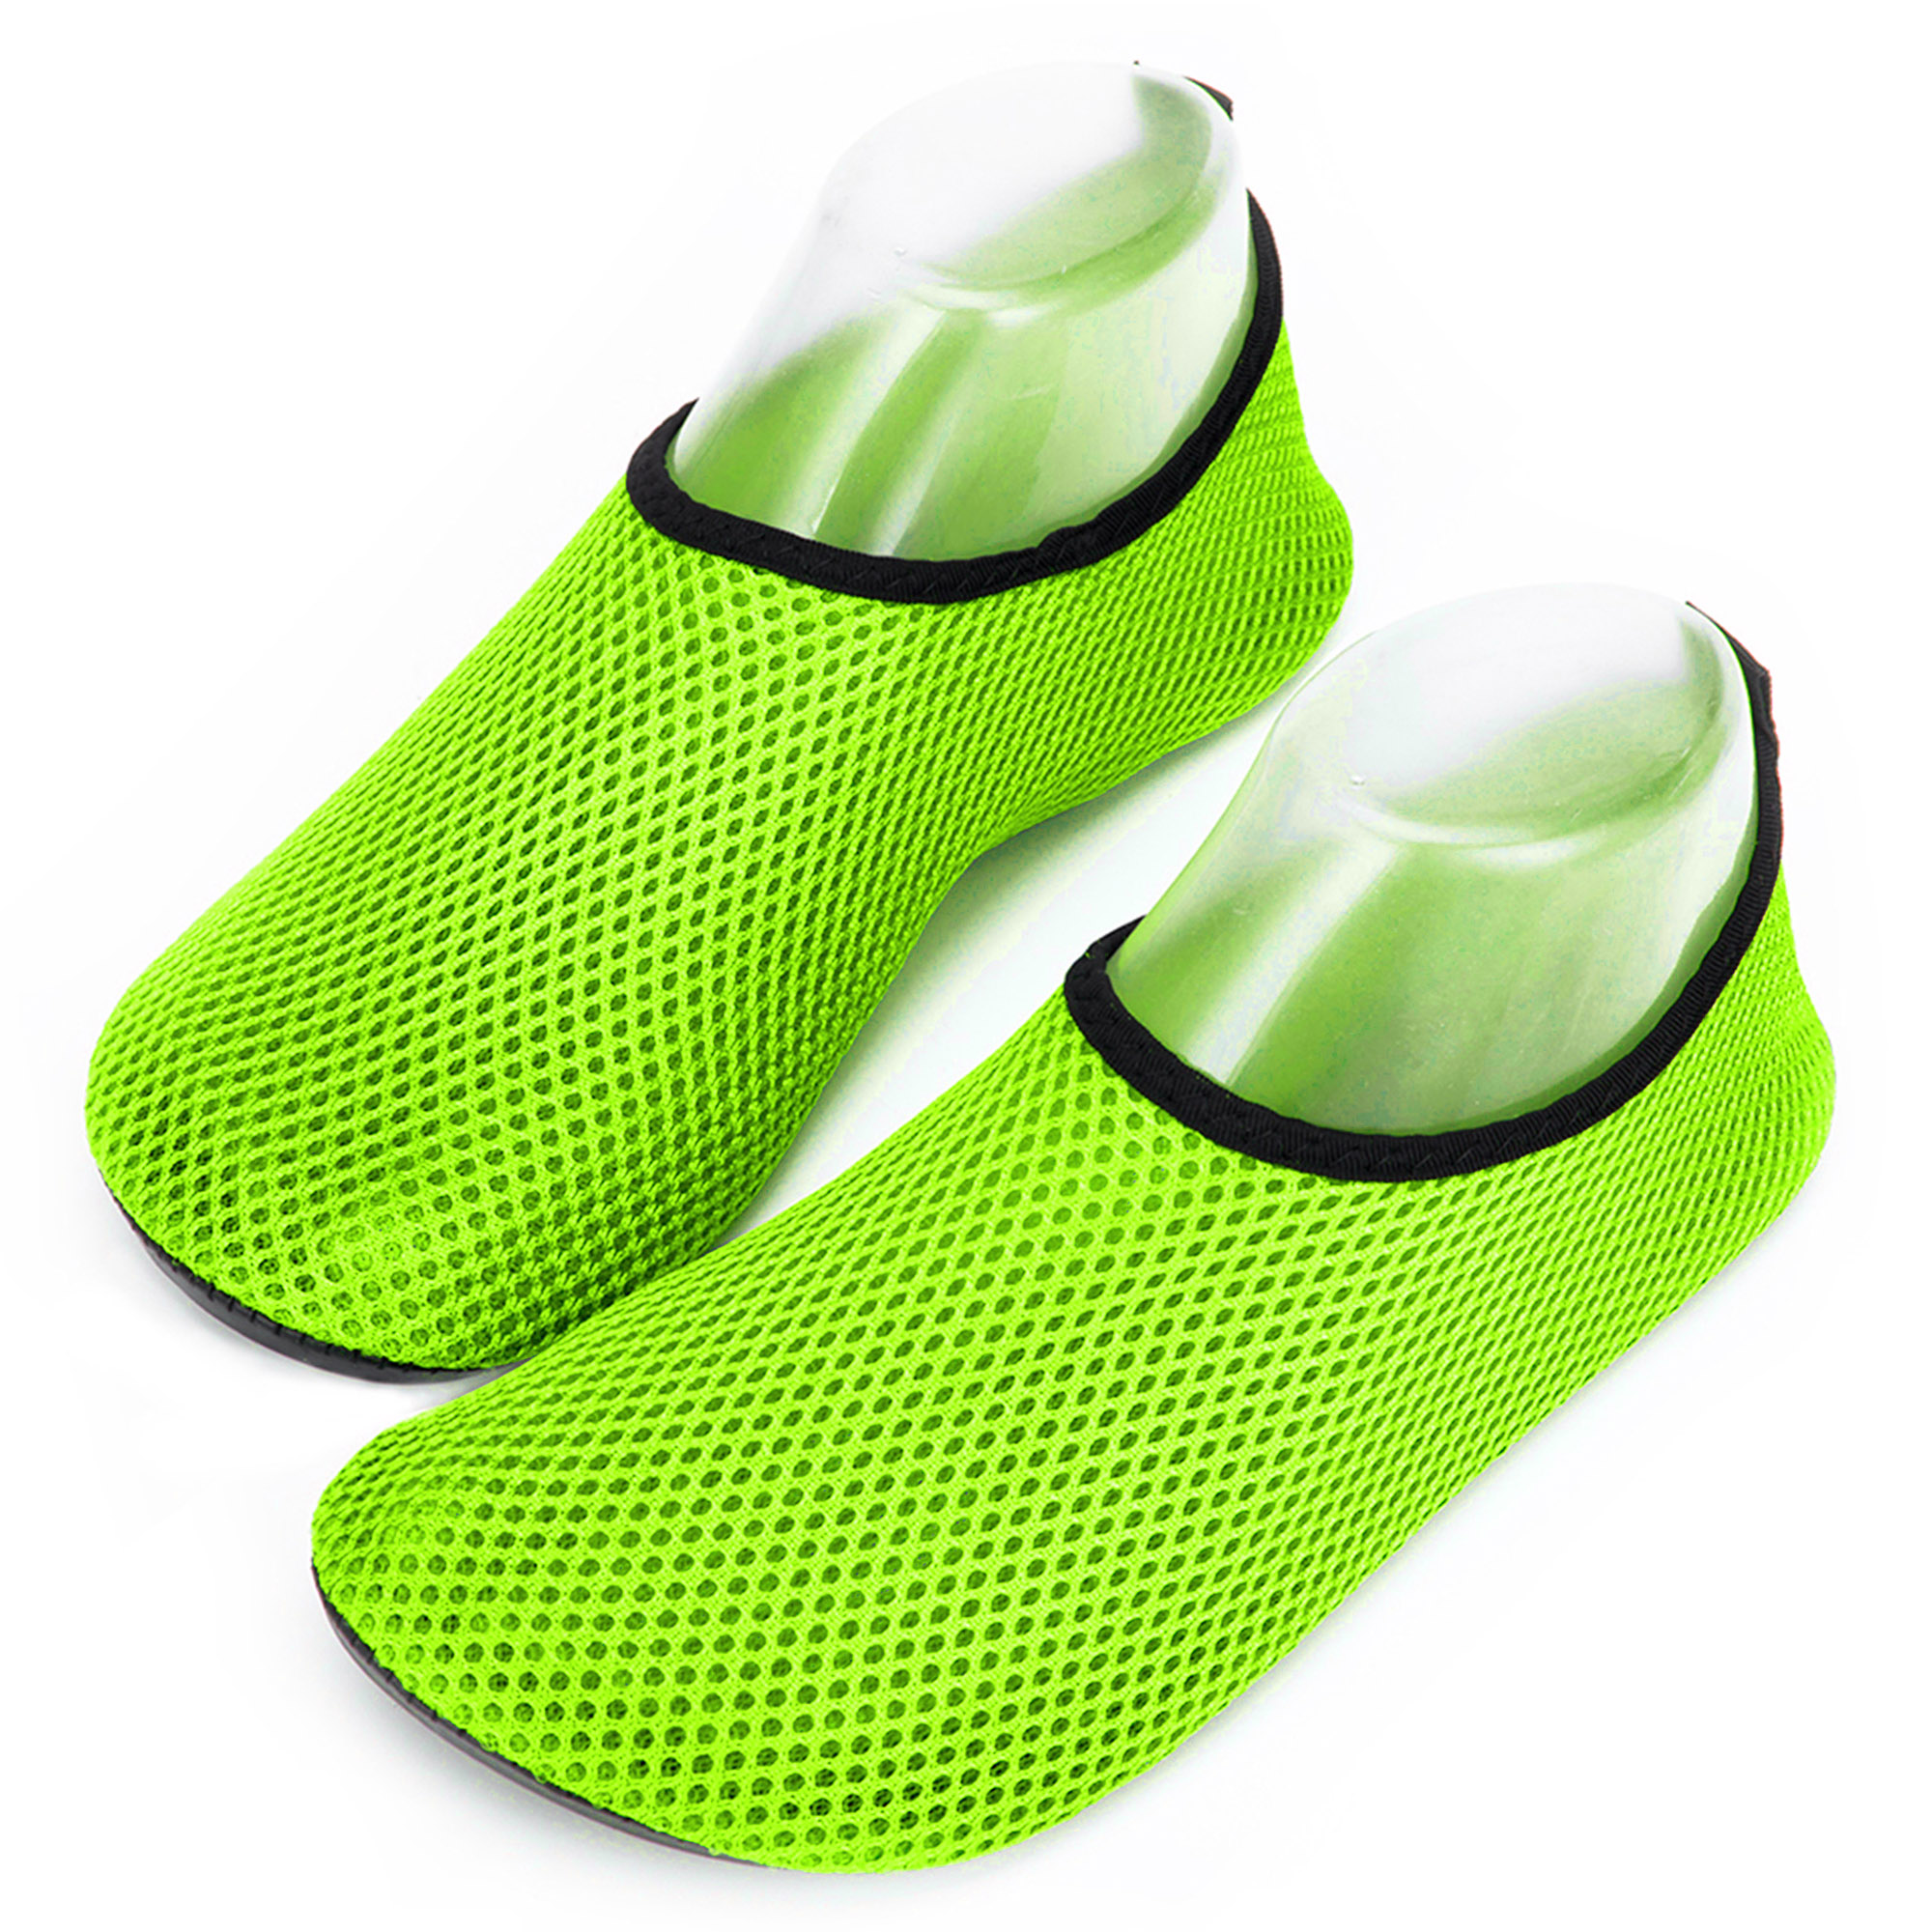 DODOING Barefoot Water Skin Shoes Summer Mesh Water Sports Shoes Unisex Beach Yoga Diving Aqua Socks Non Slip Surfing Swimming Quick-drying Pool Beach Shoes, Black/ Green/ Rose Red/ Blue - image 1 of 8